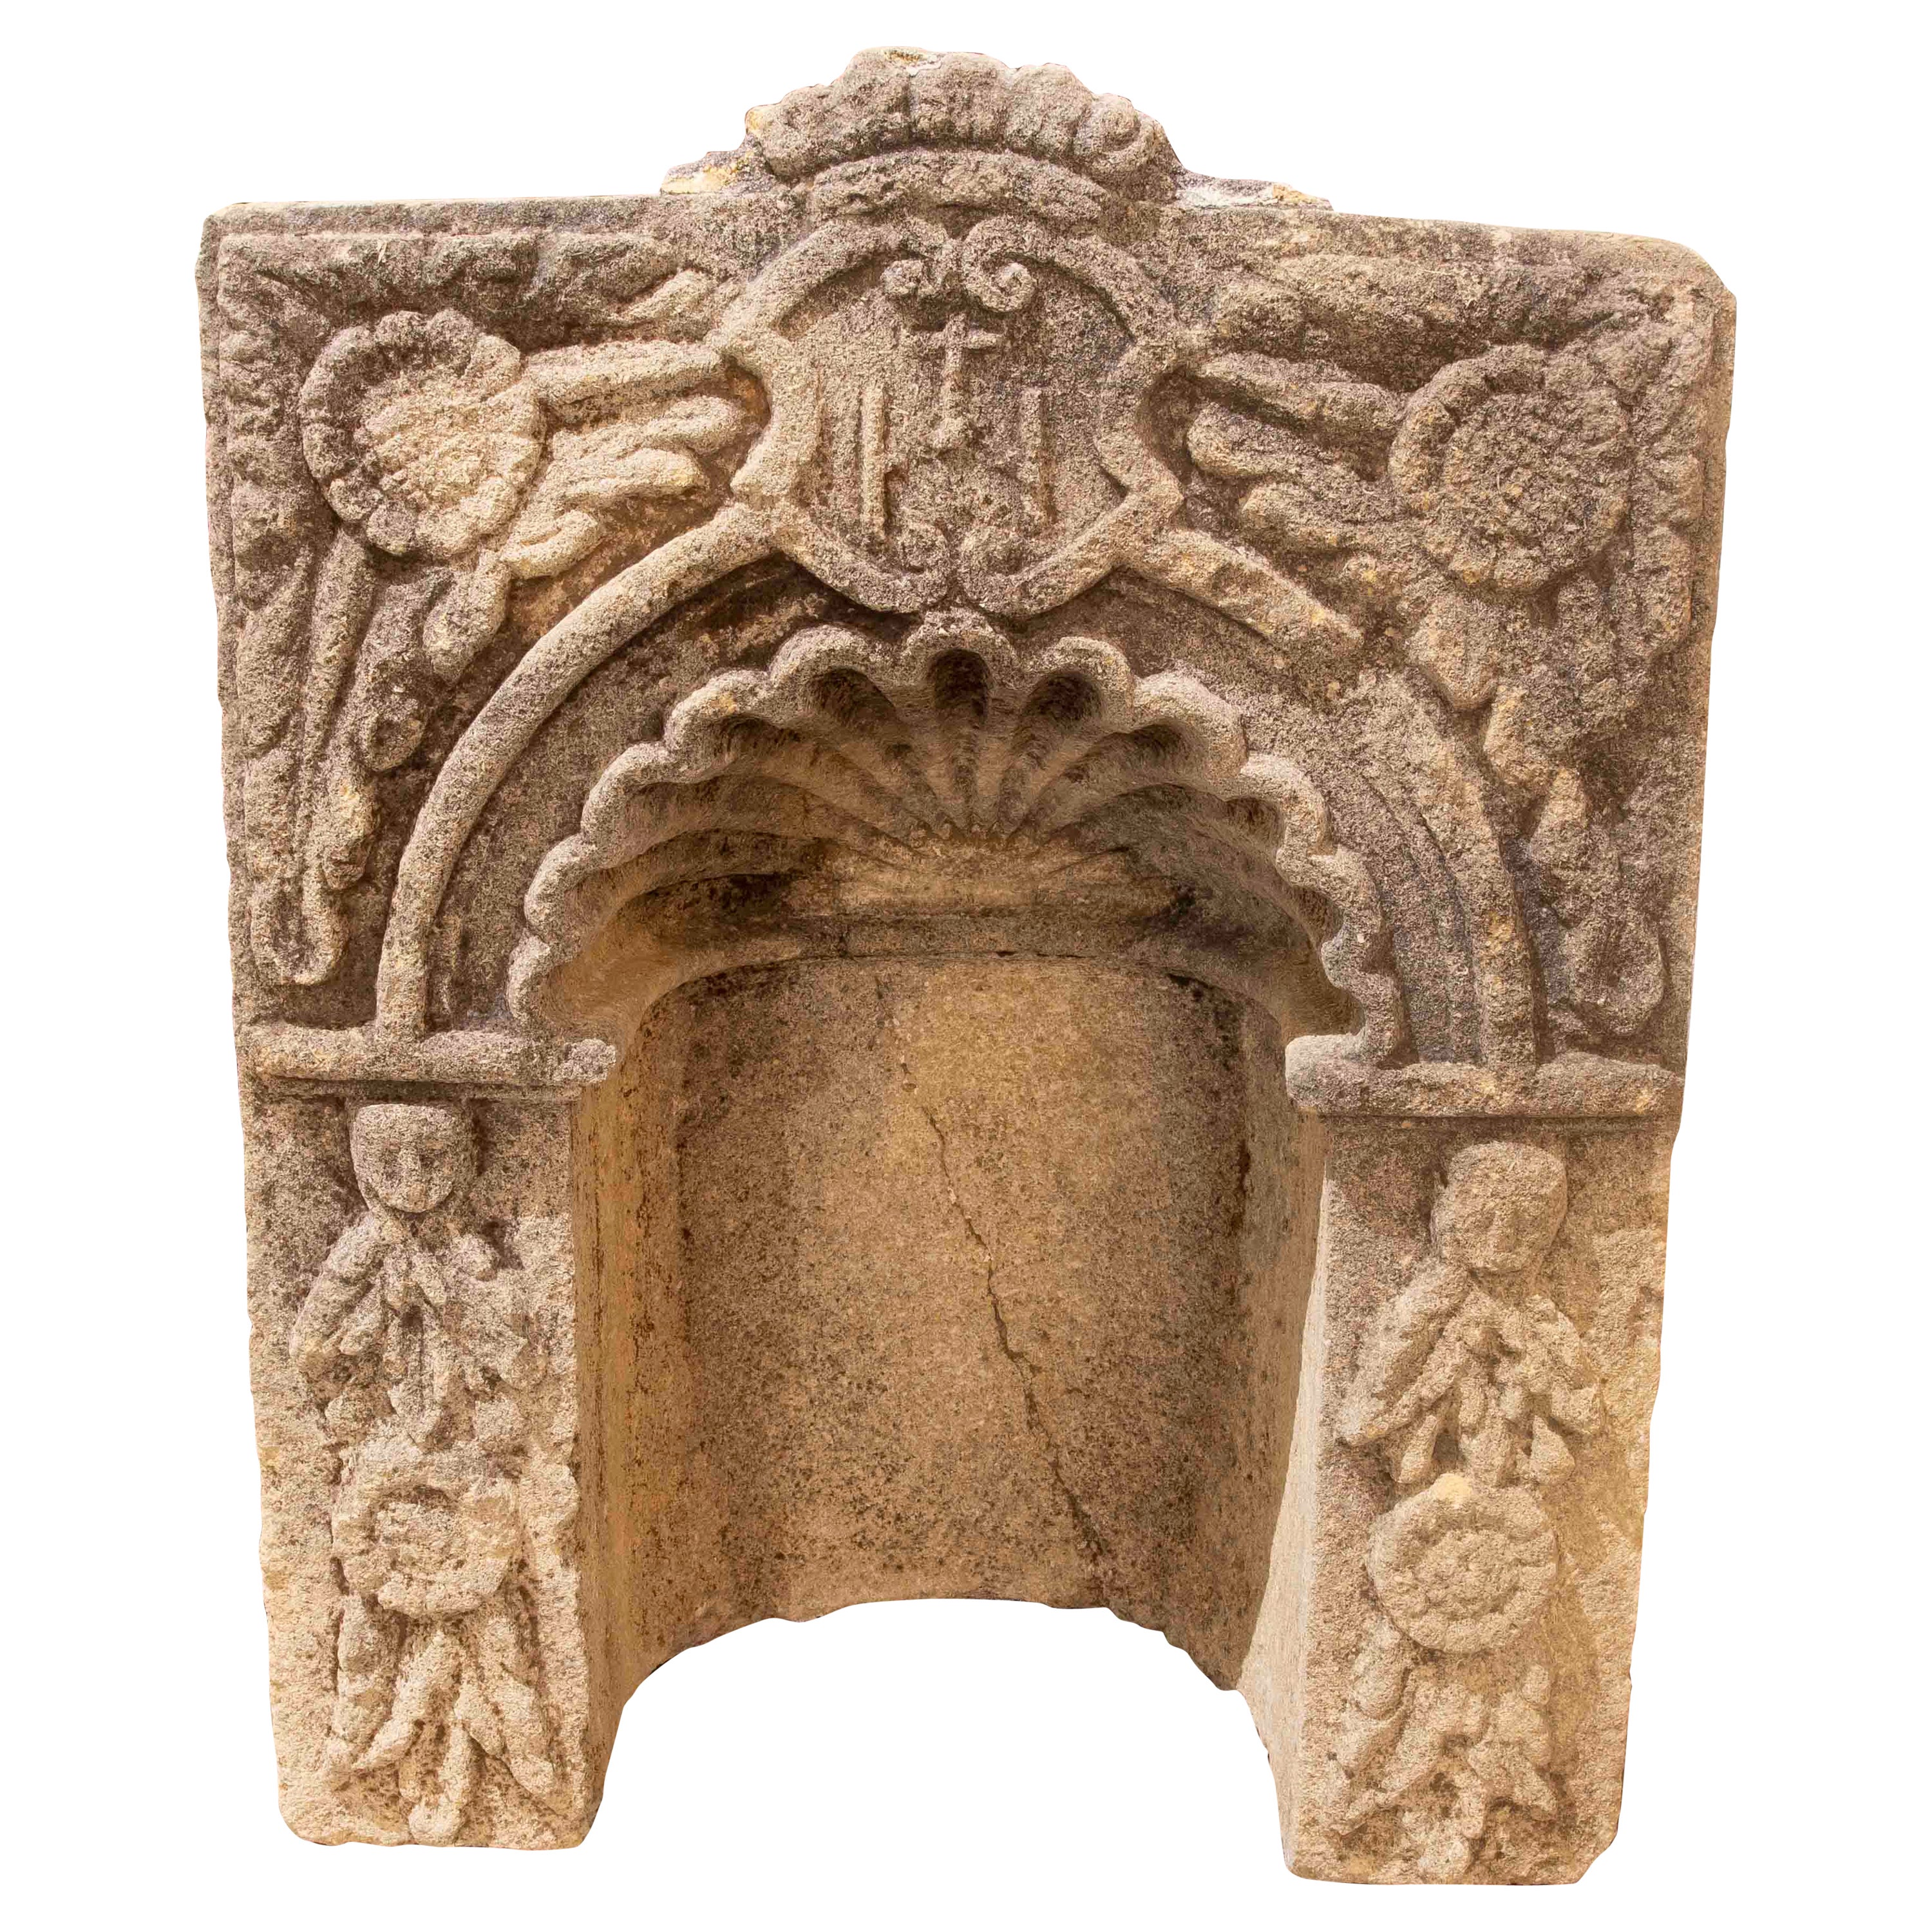 17th Century Spanish Sandstone Niche Hand-Carved with Flowers